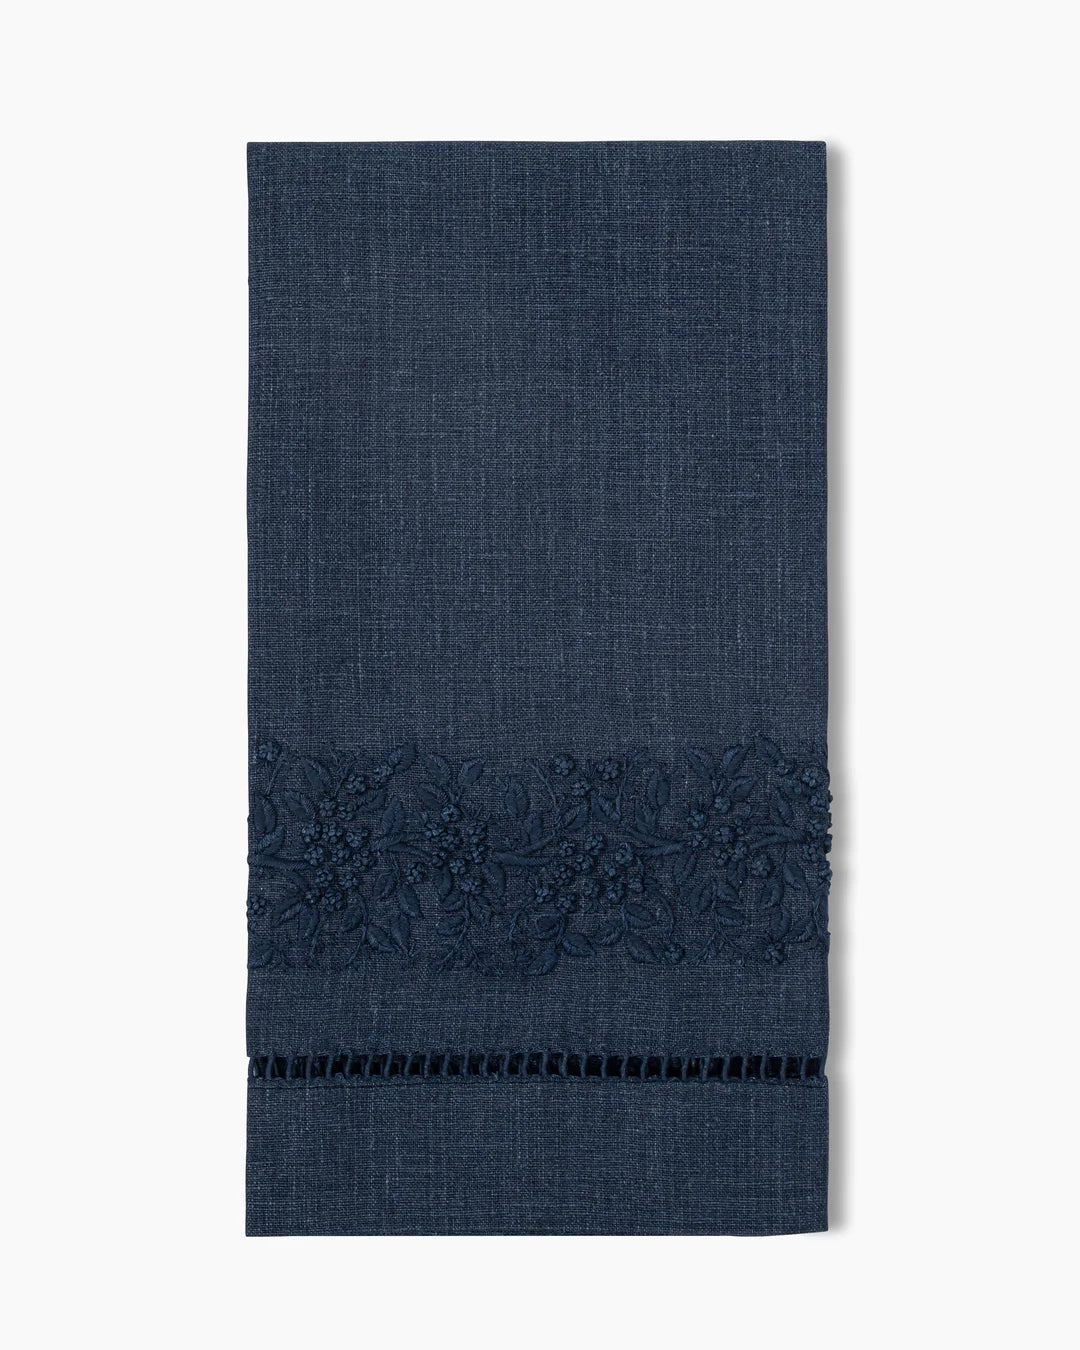 Jardin Monochrome Hand Towels in Navy, Set of Two